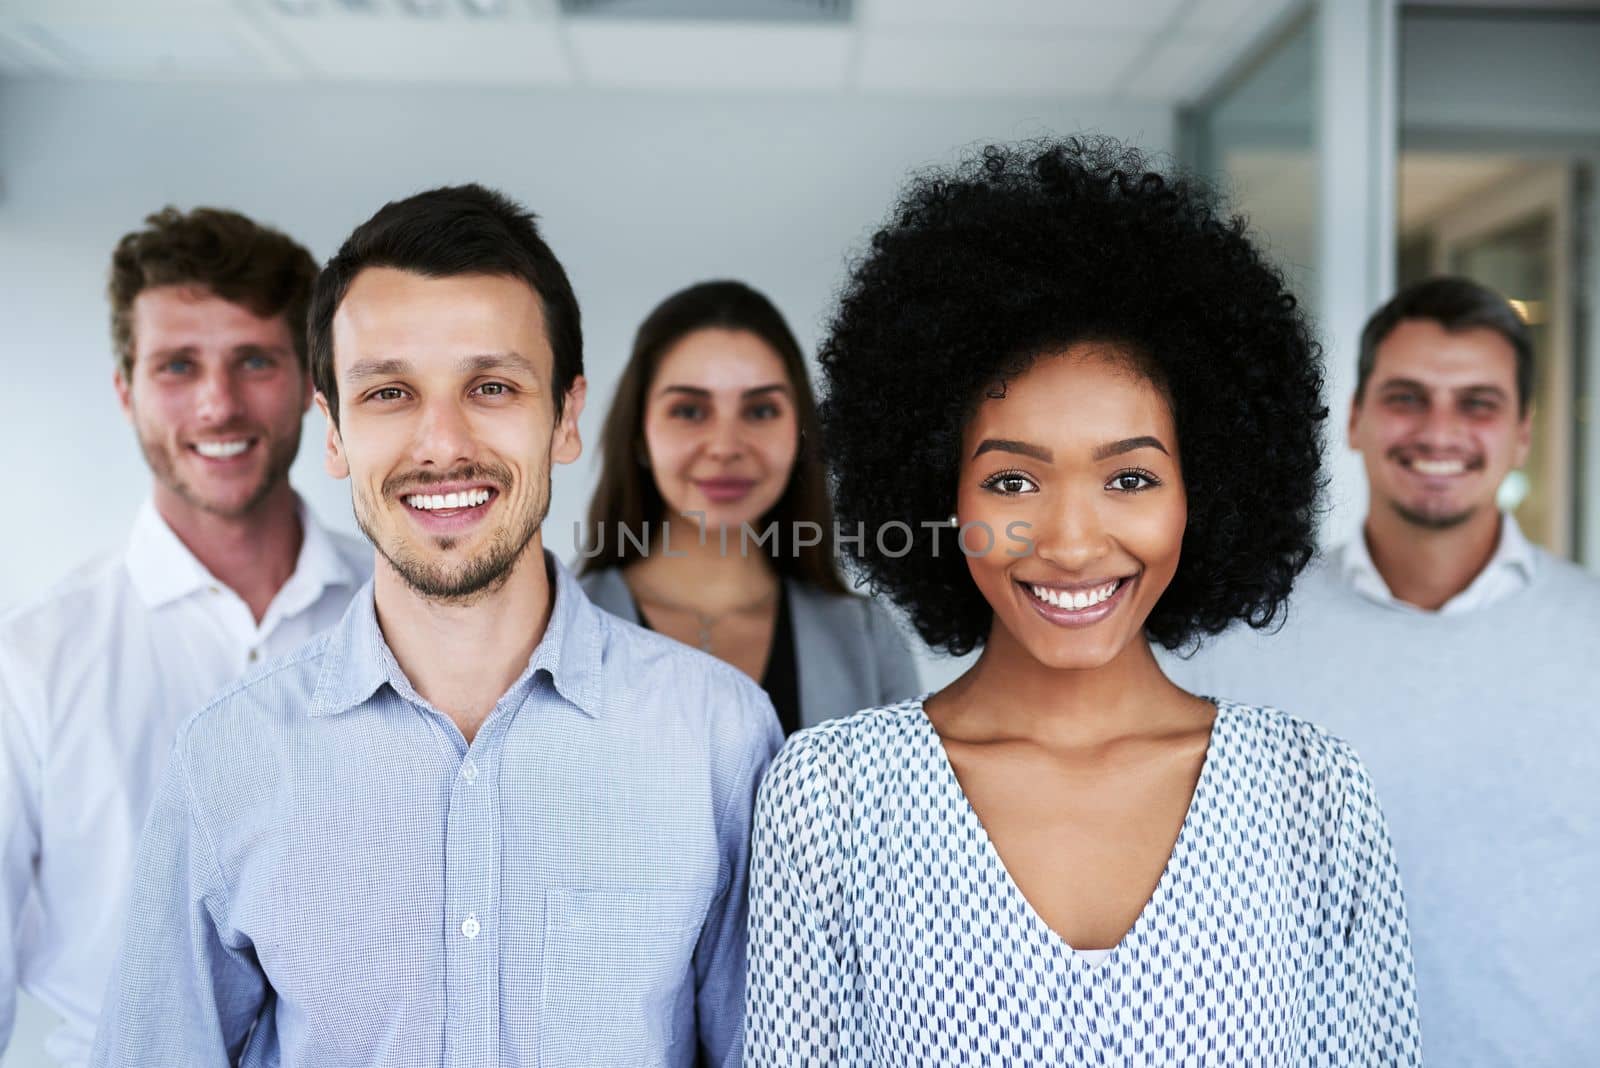 Were here to achieve our best. Portrait of a group of businesspeople standing together in an office